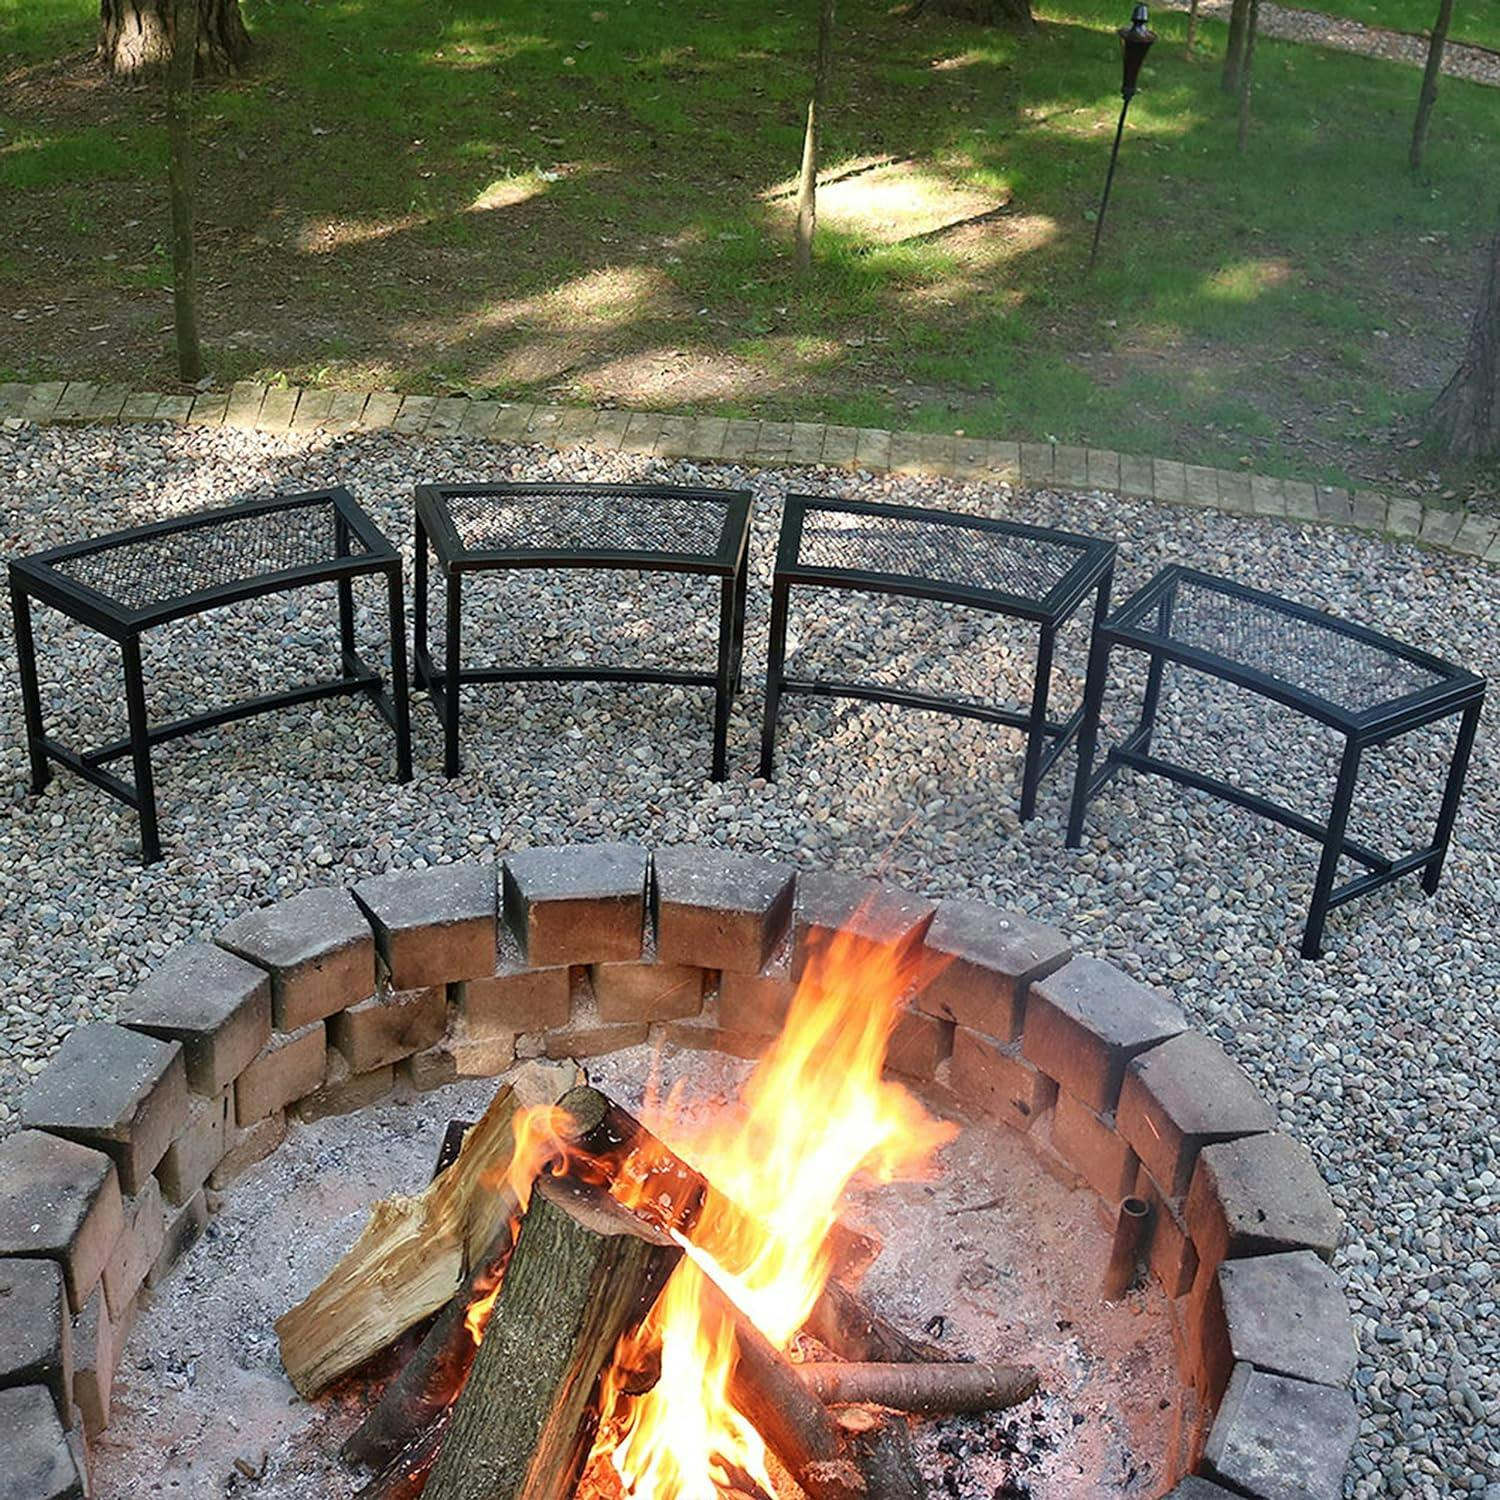 Curved Black Mesh Metal Outdoor Fire Pit Bench Set of 4